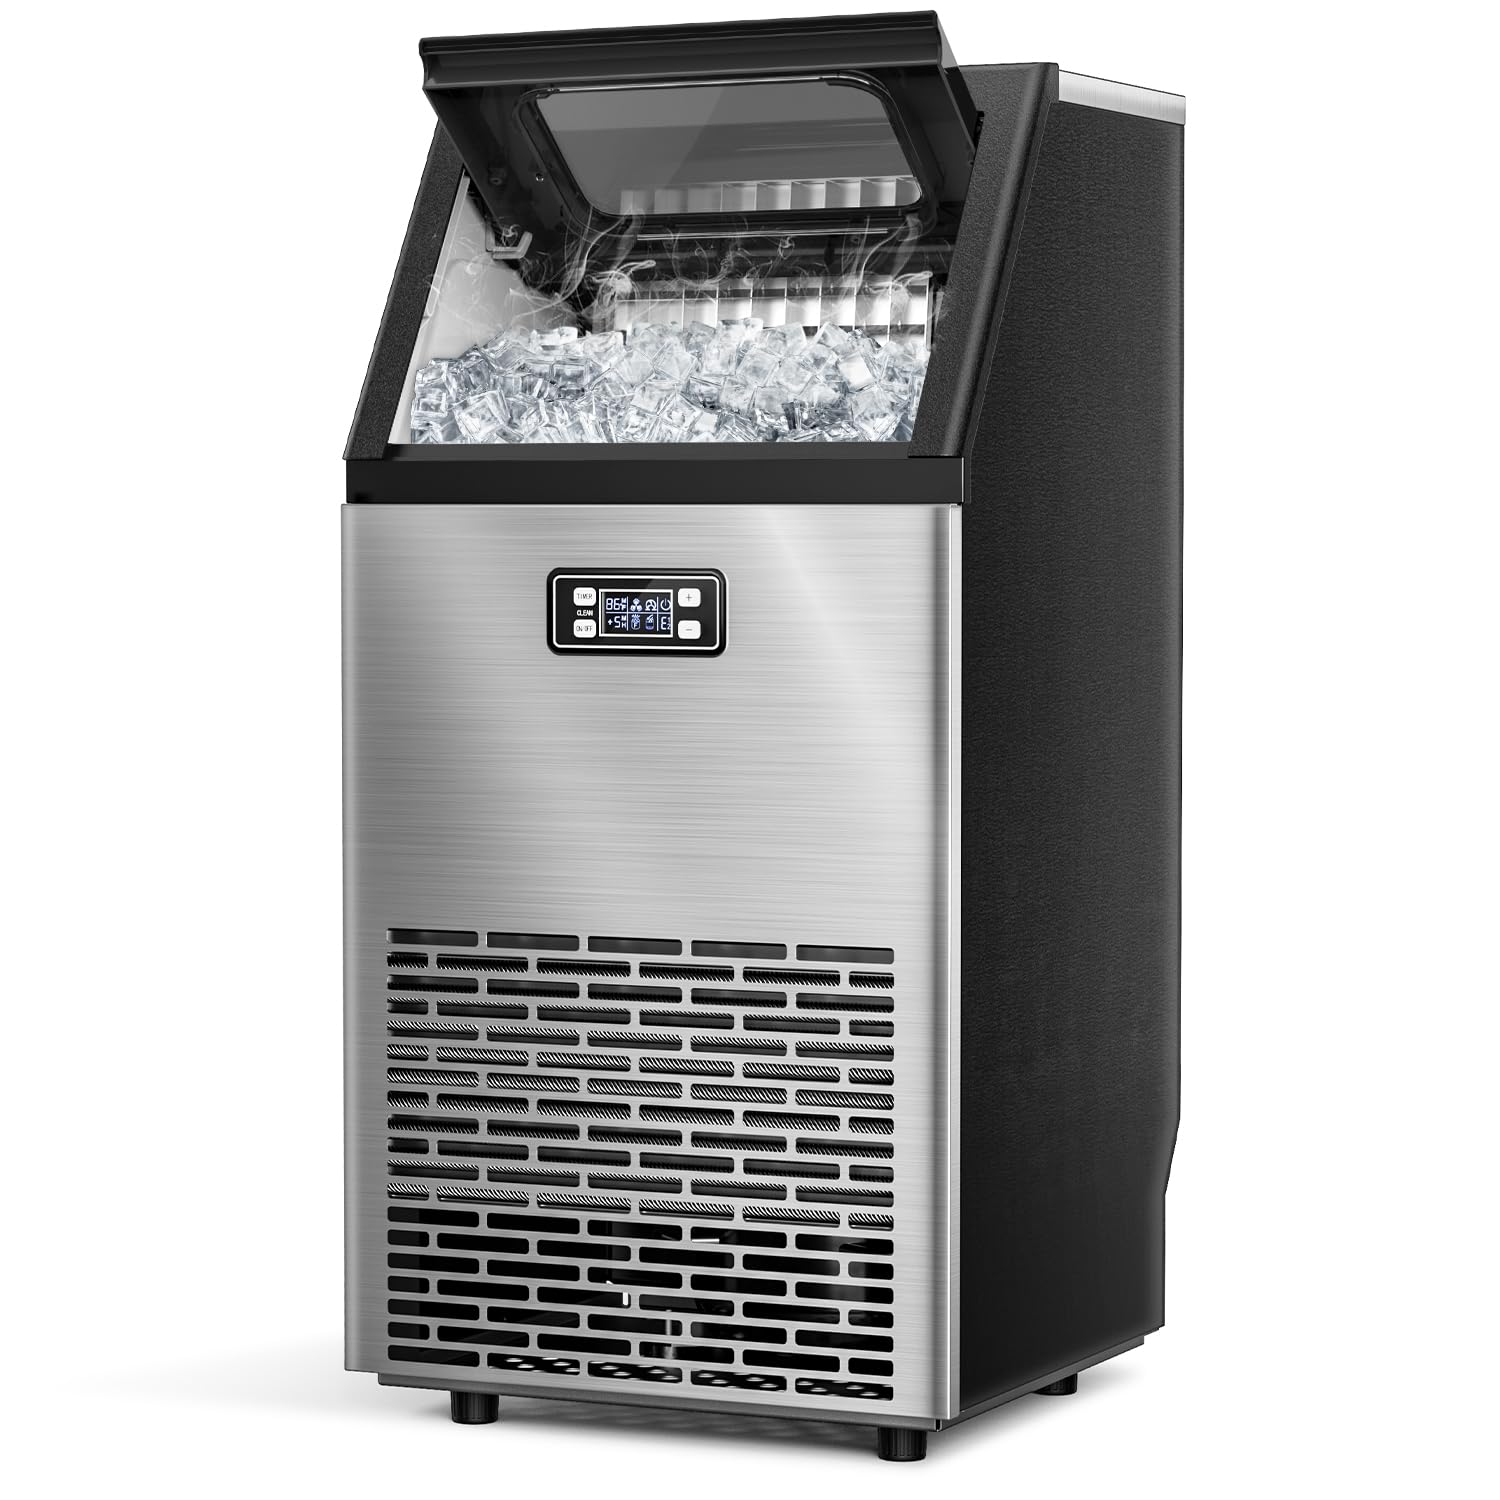 The Importance of a Water Filter in your Commercial Ice Maker